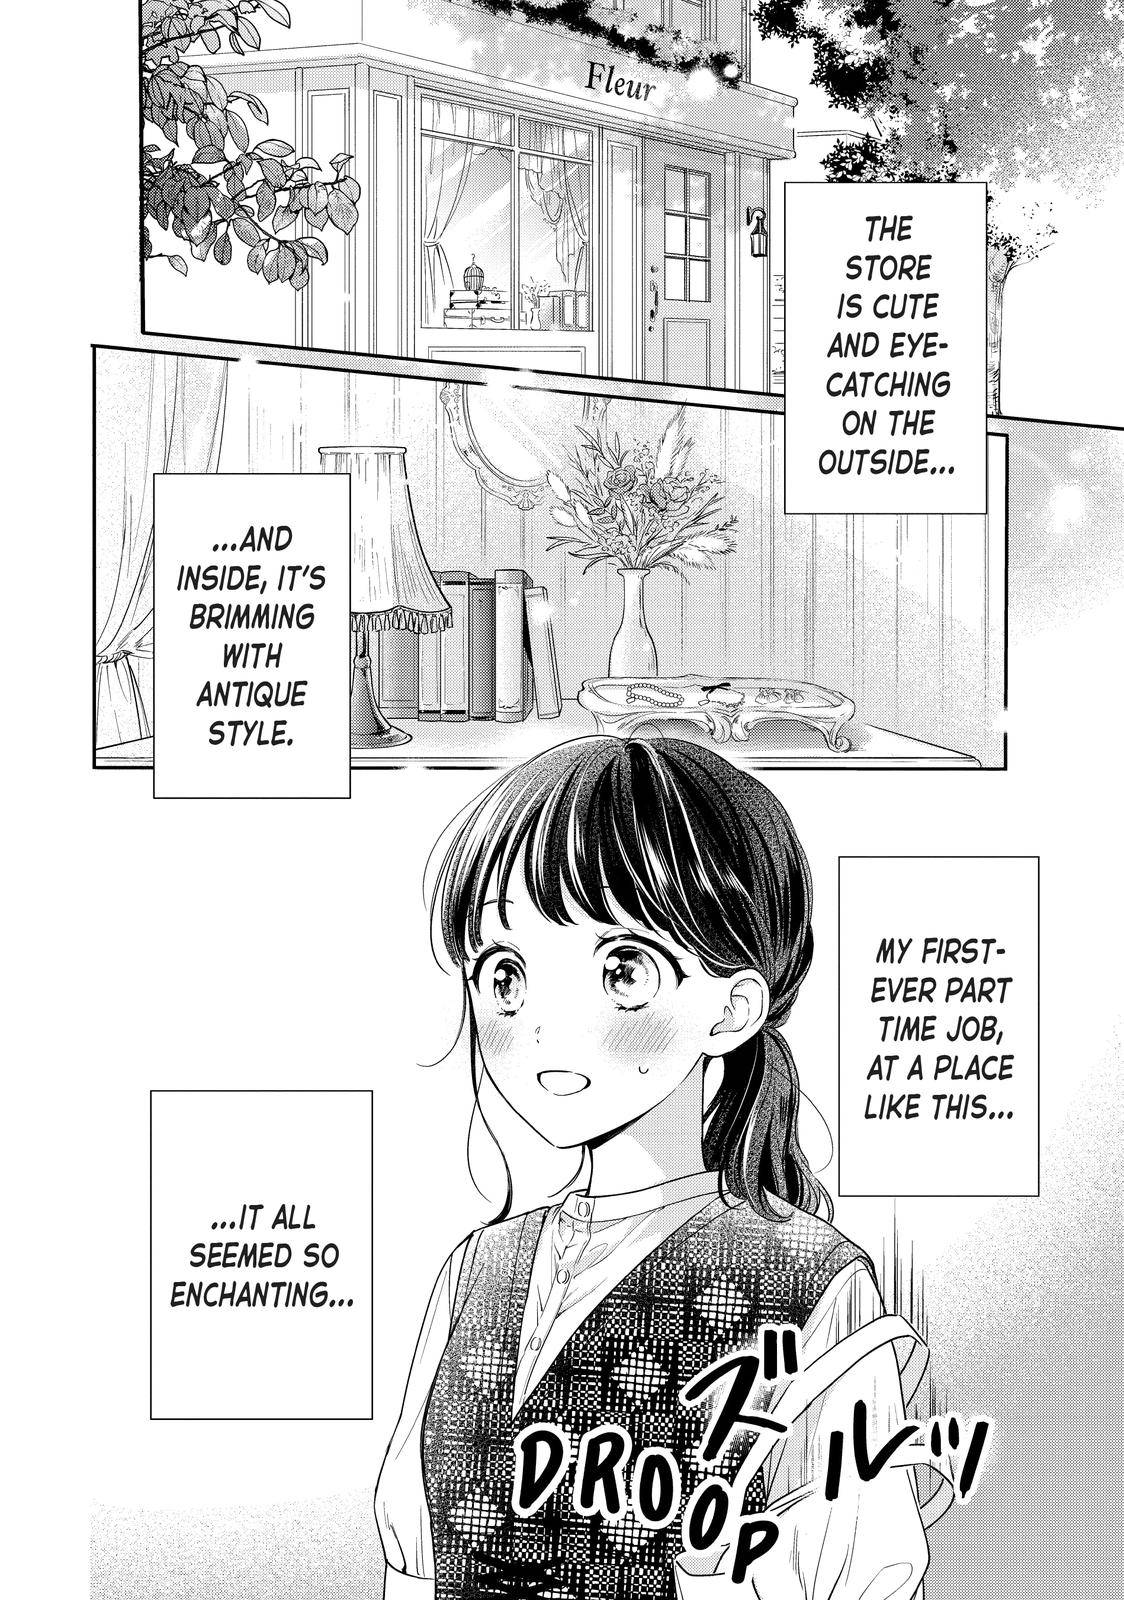 Chihiro-kun Only Has Eyes for Me - chapter 30 - #2